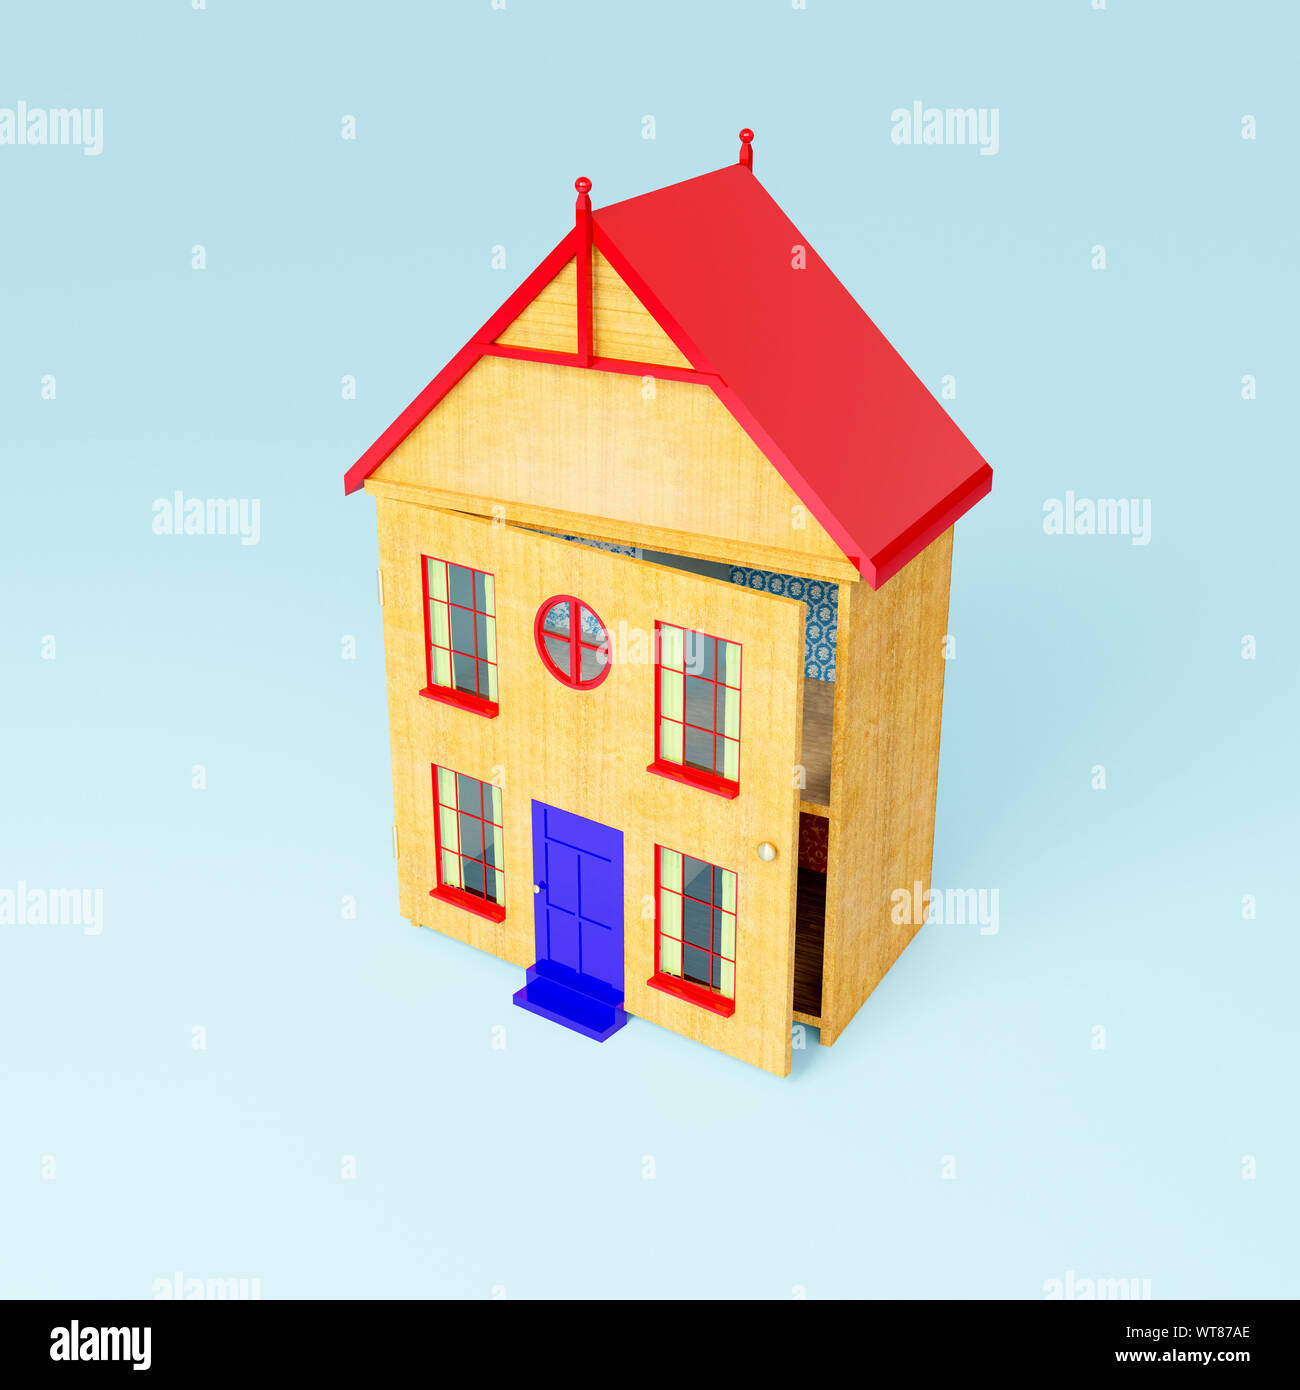 Childrens wooden toys, a wooden dolls house or dollhouse toy Stock Photo